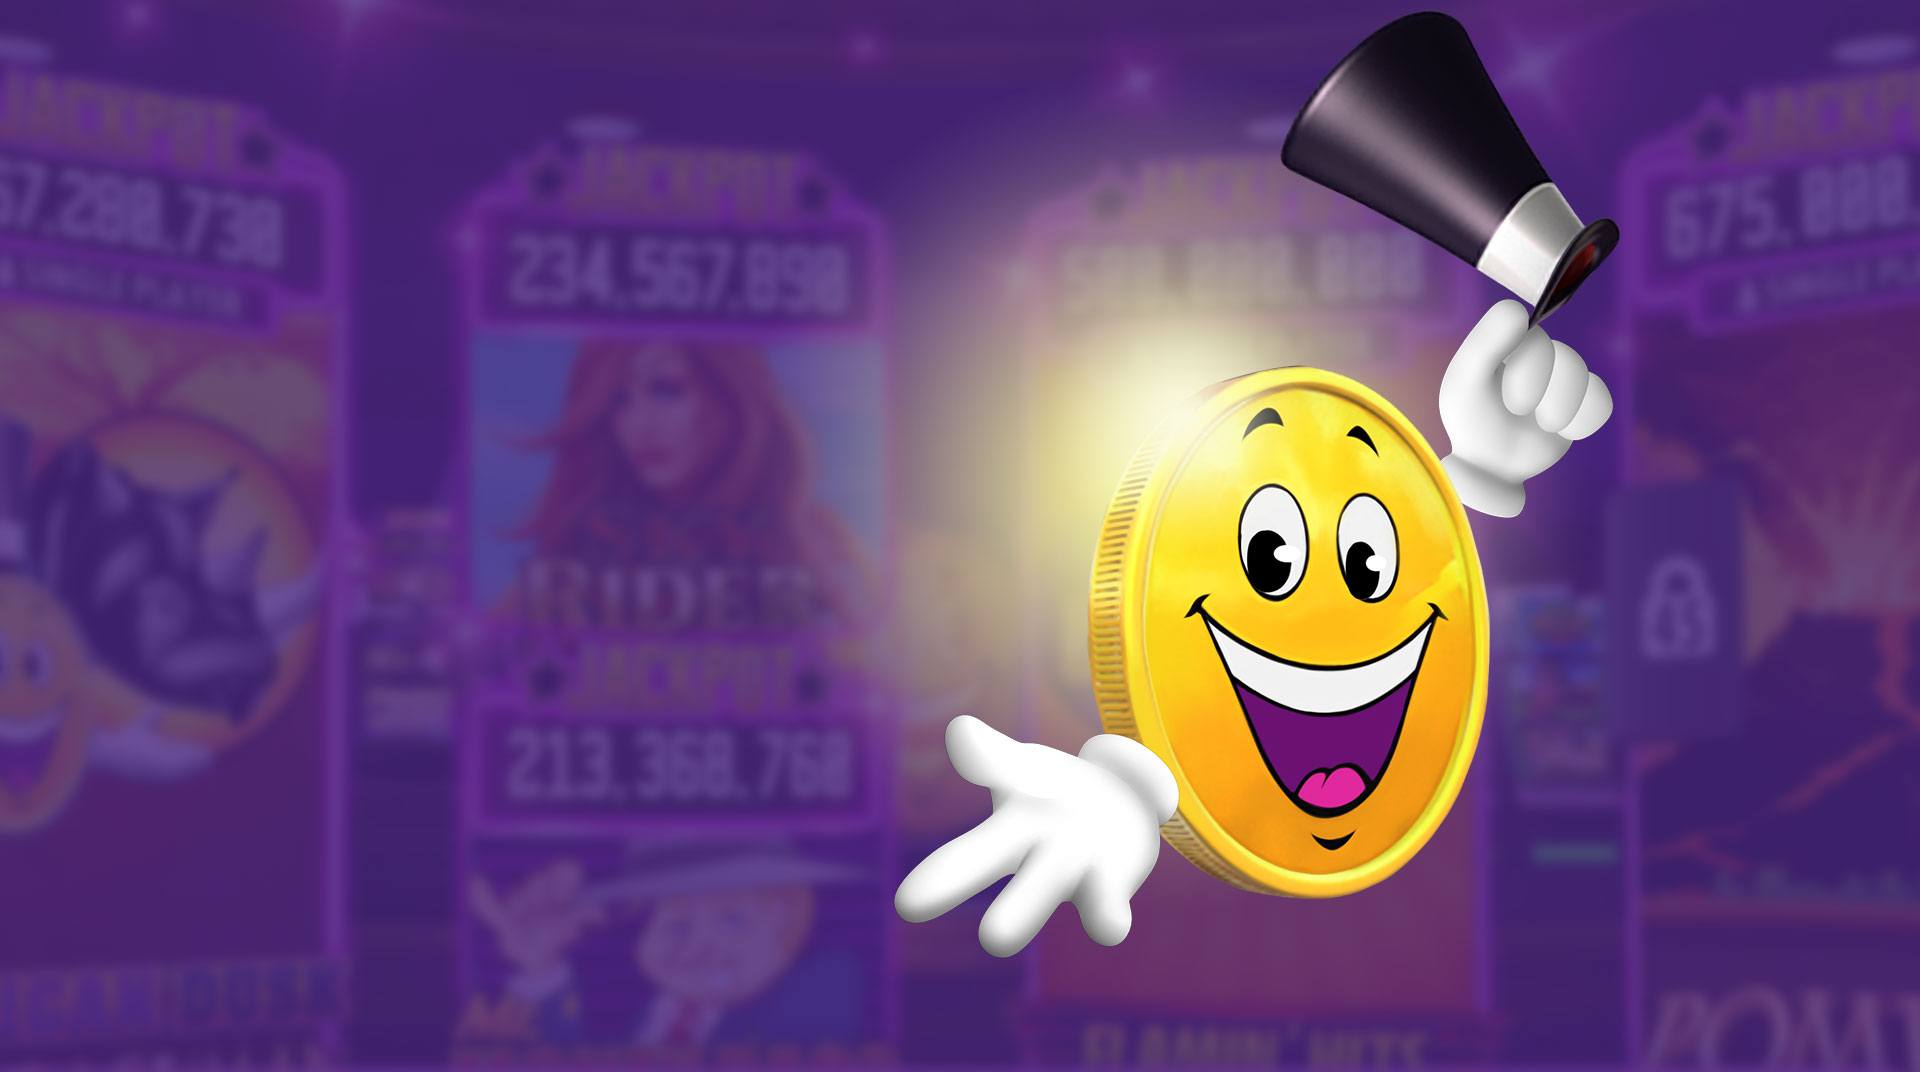 How To Make Your free penny slot machine games Look Amazing In 5 Days